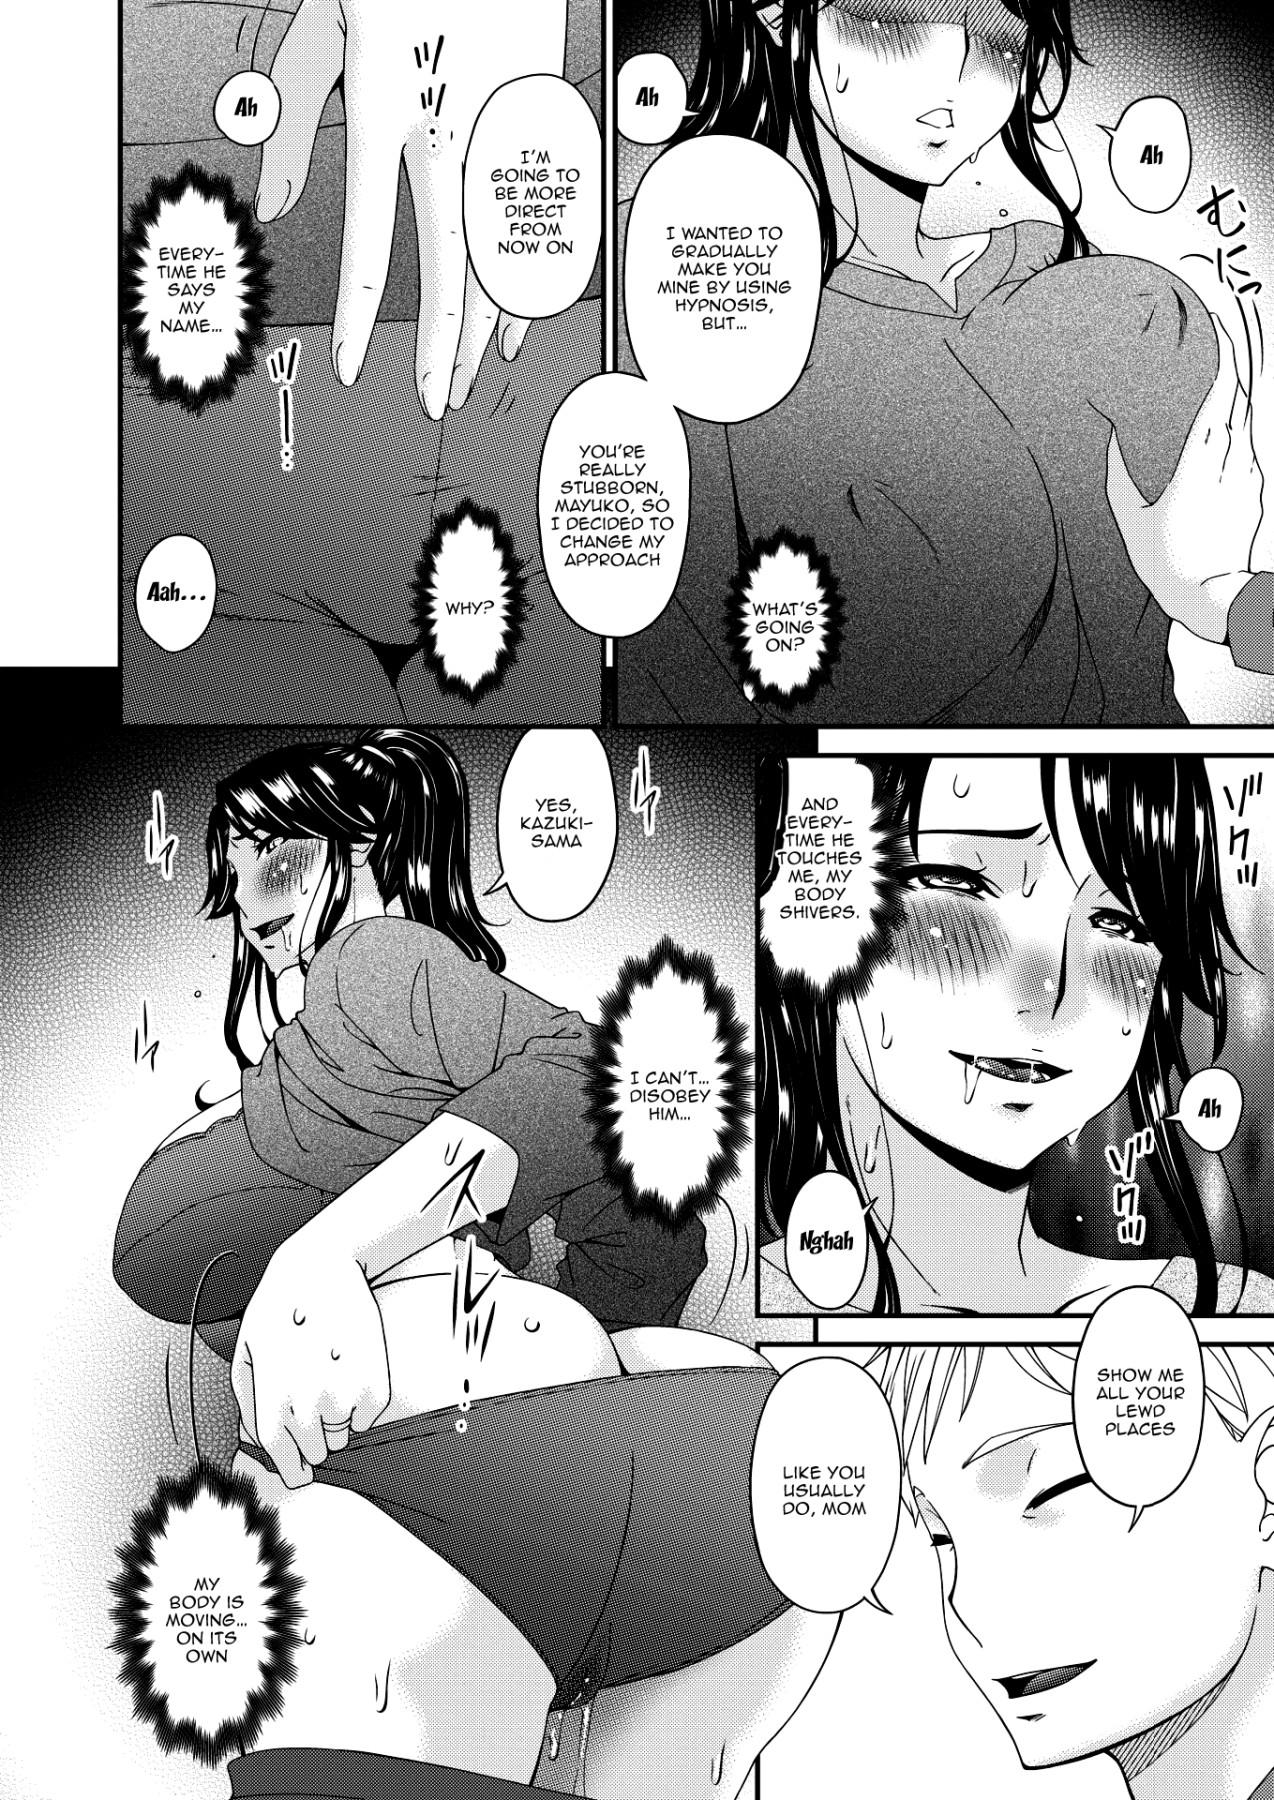 [Bai Asuka] Gibo, Omou Toki... | When I Started Thinking About My Mother-In-Law... (COMIC HOTMILK 2020-04) [English] {Doujins.com} [Digital] 9